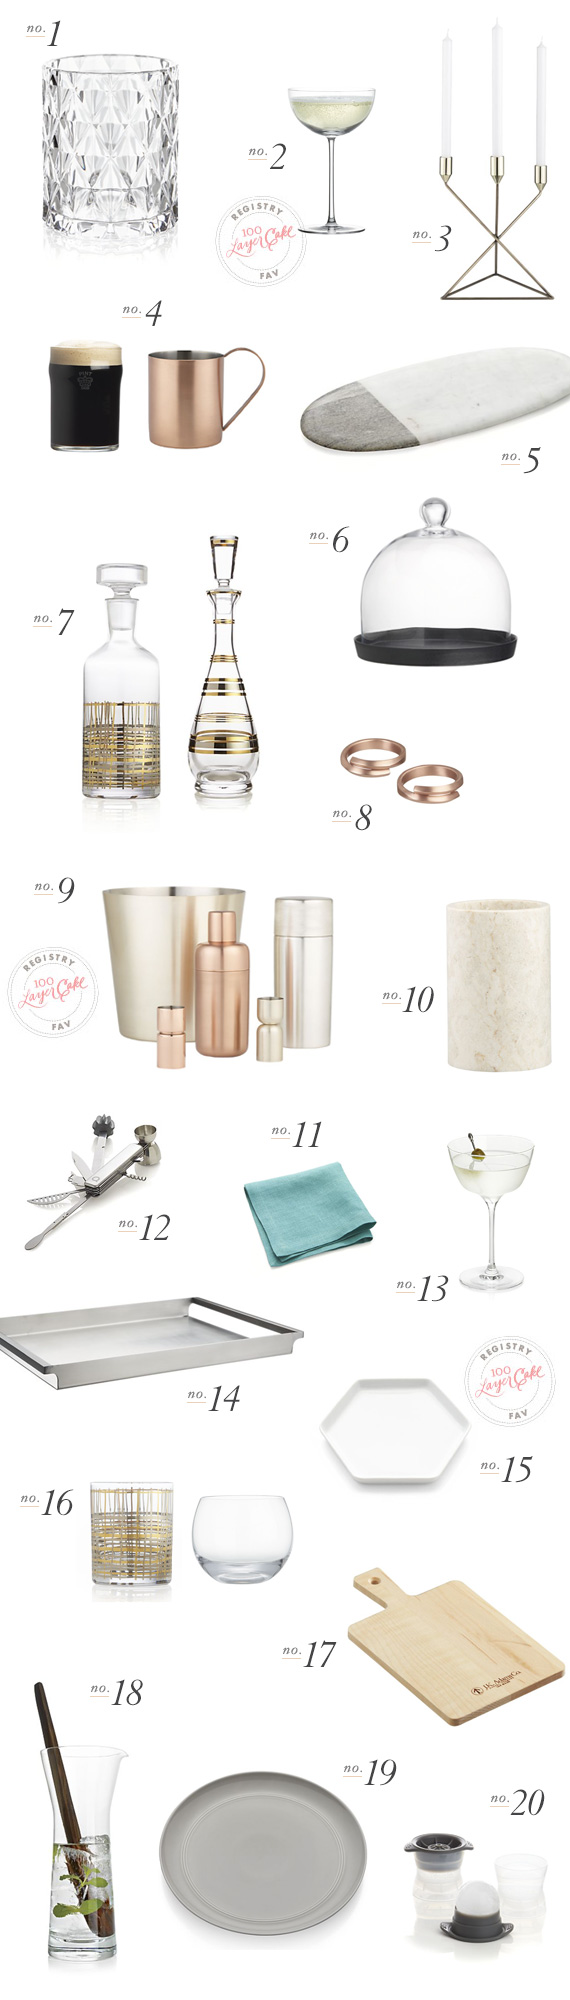 Engagement party registry with Crate and Barrel | 100 Layer Cake